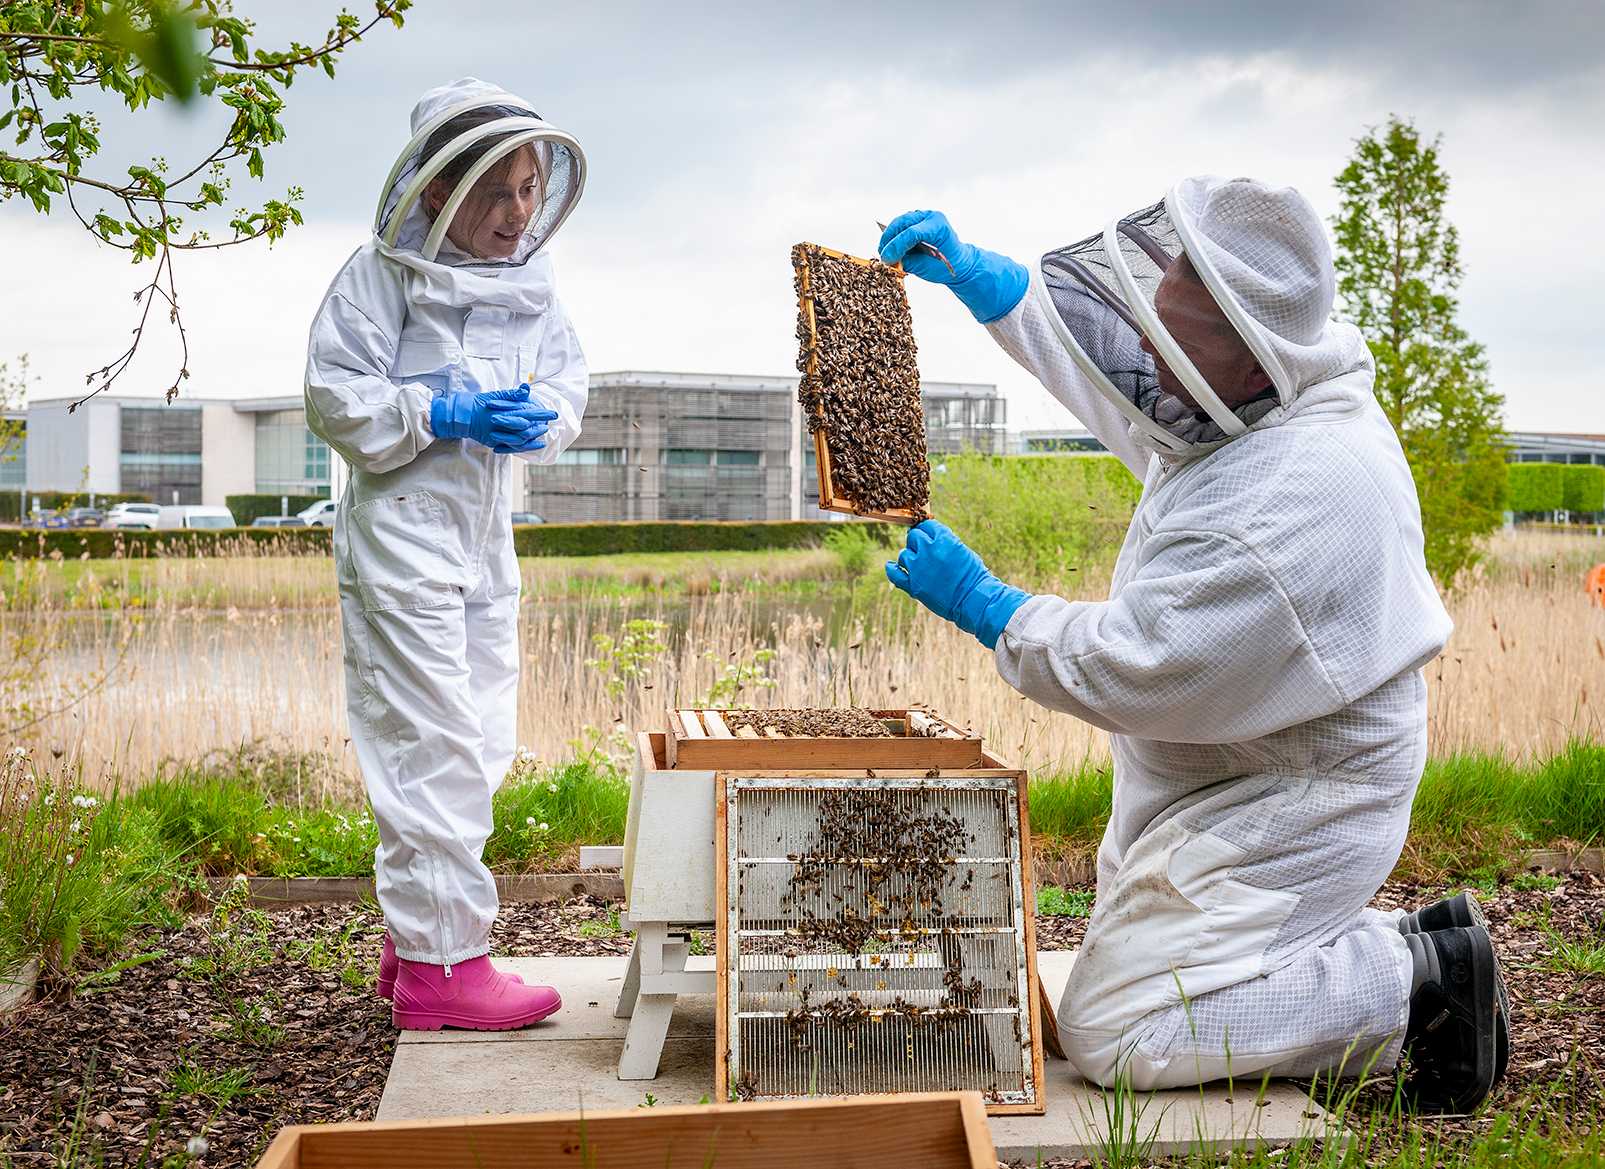 https://mediapool.bmwgroup.com/cache/P9/202105/P90422830/P90422830-rolls-royce-appoints-poppy-liddle-as-first-ever-junior-beekeeper-1605px.jpg